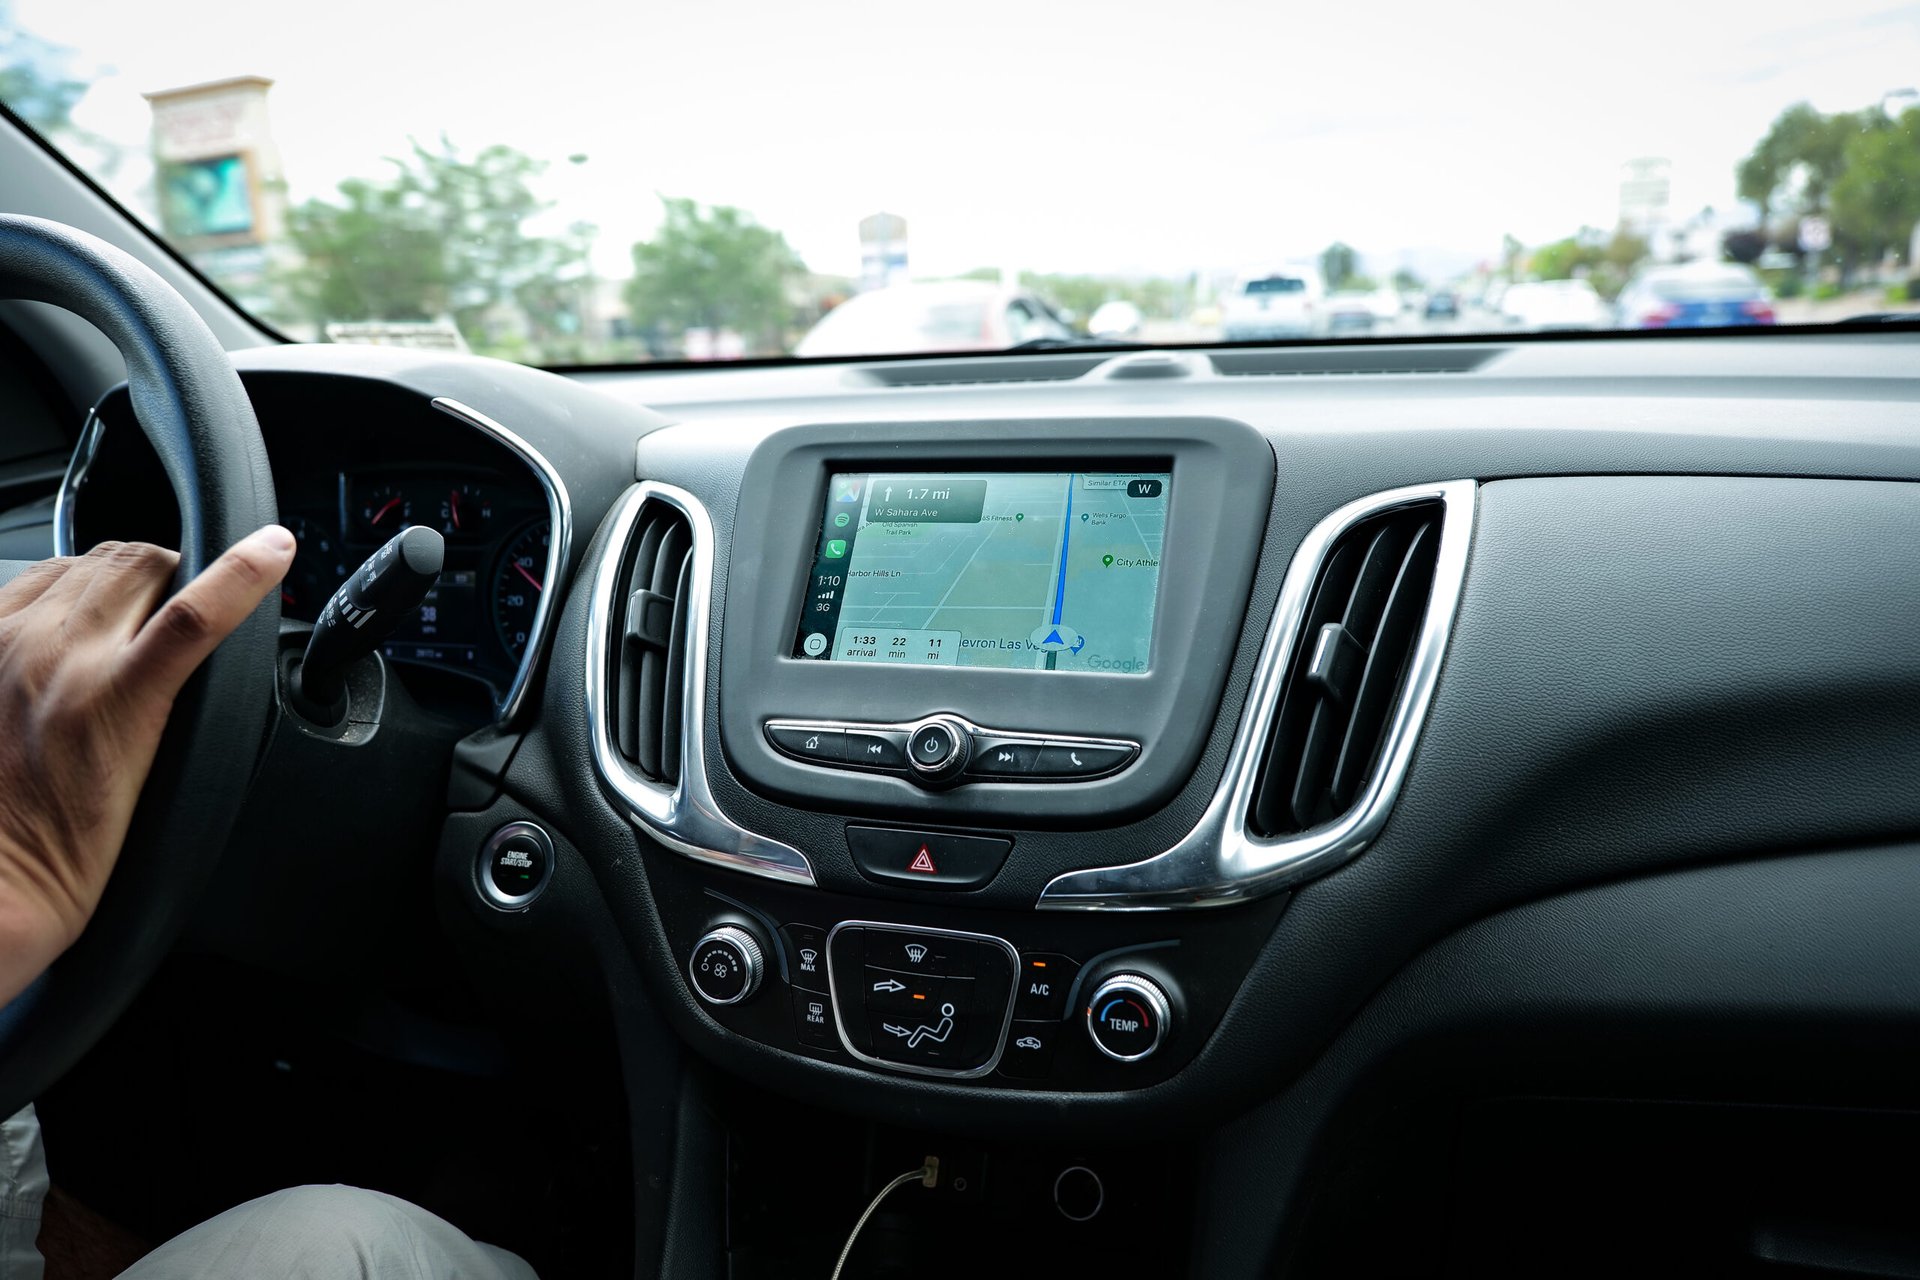 car with built-in navigation system